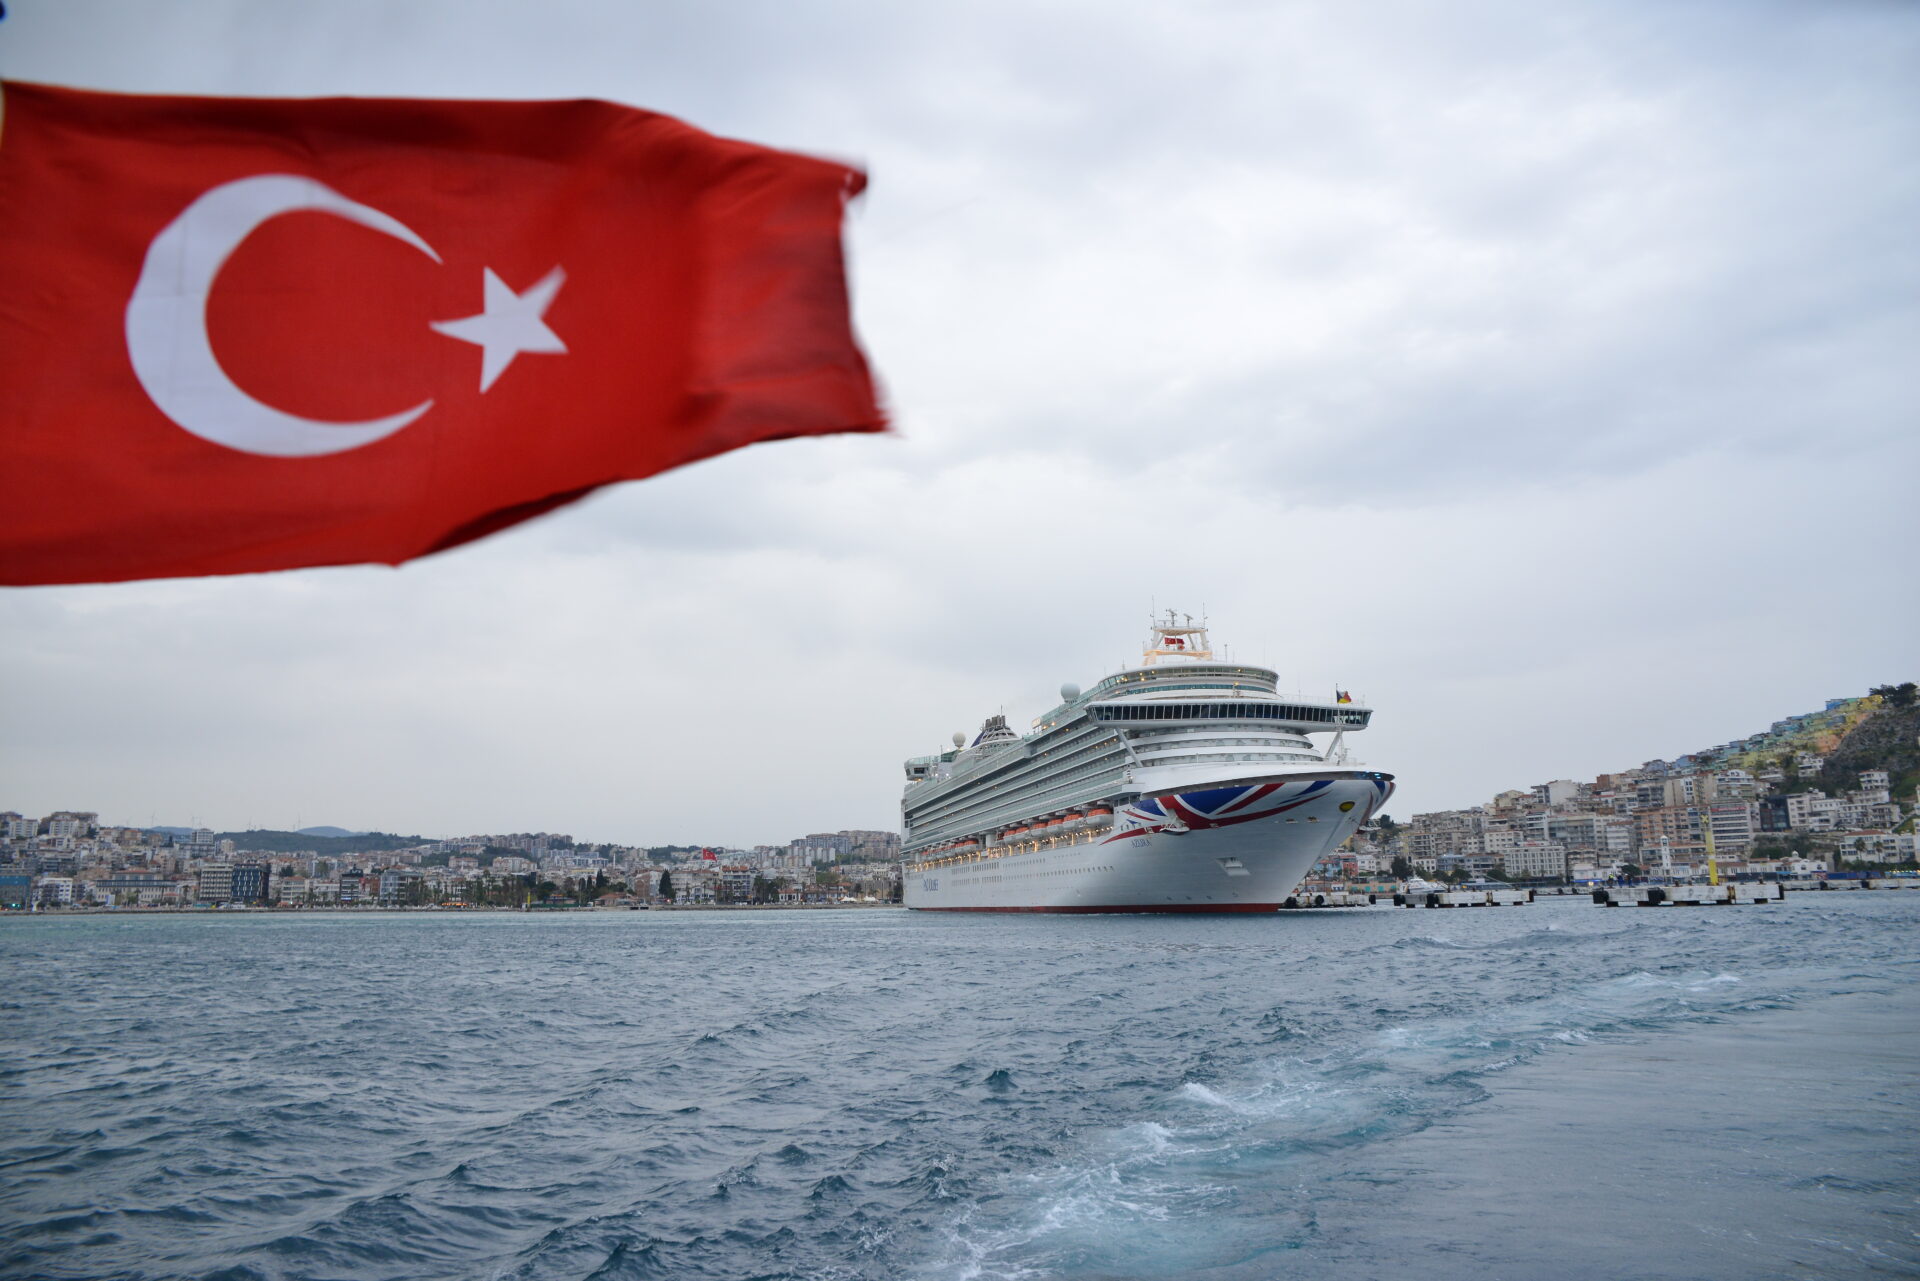 The Turkish resort of Kusadasi received the Azura cruise ship for the first time